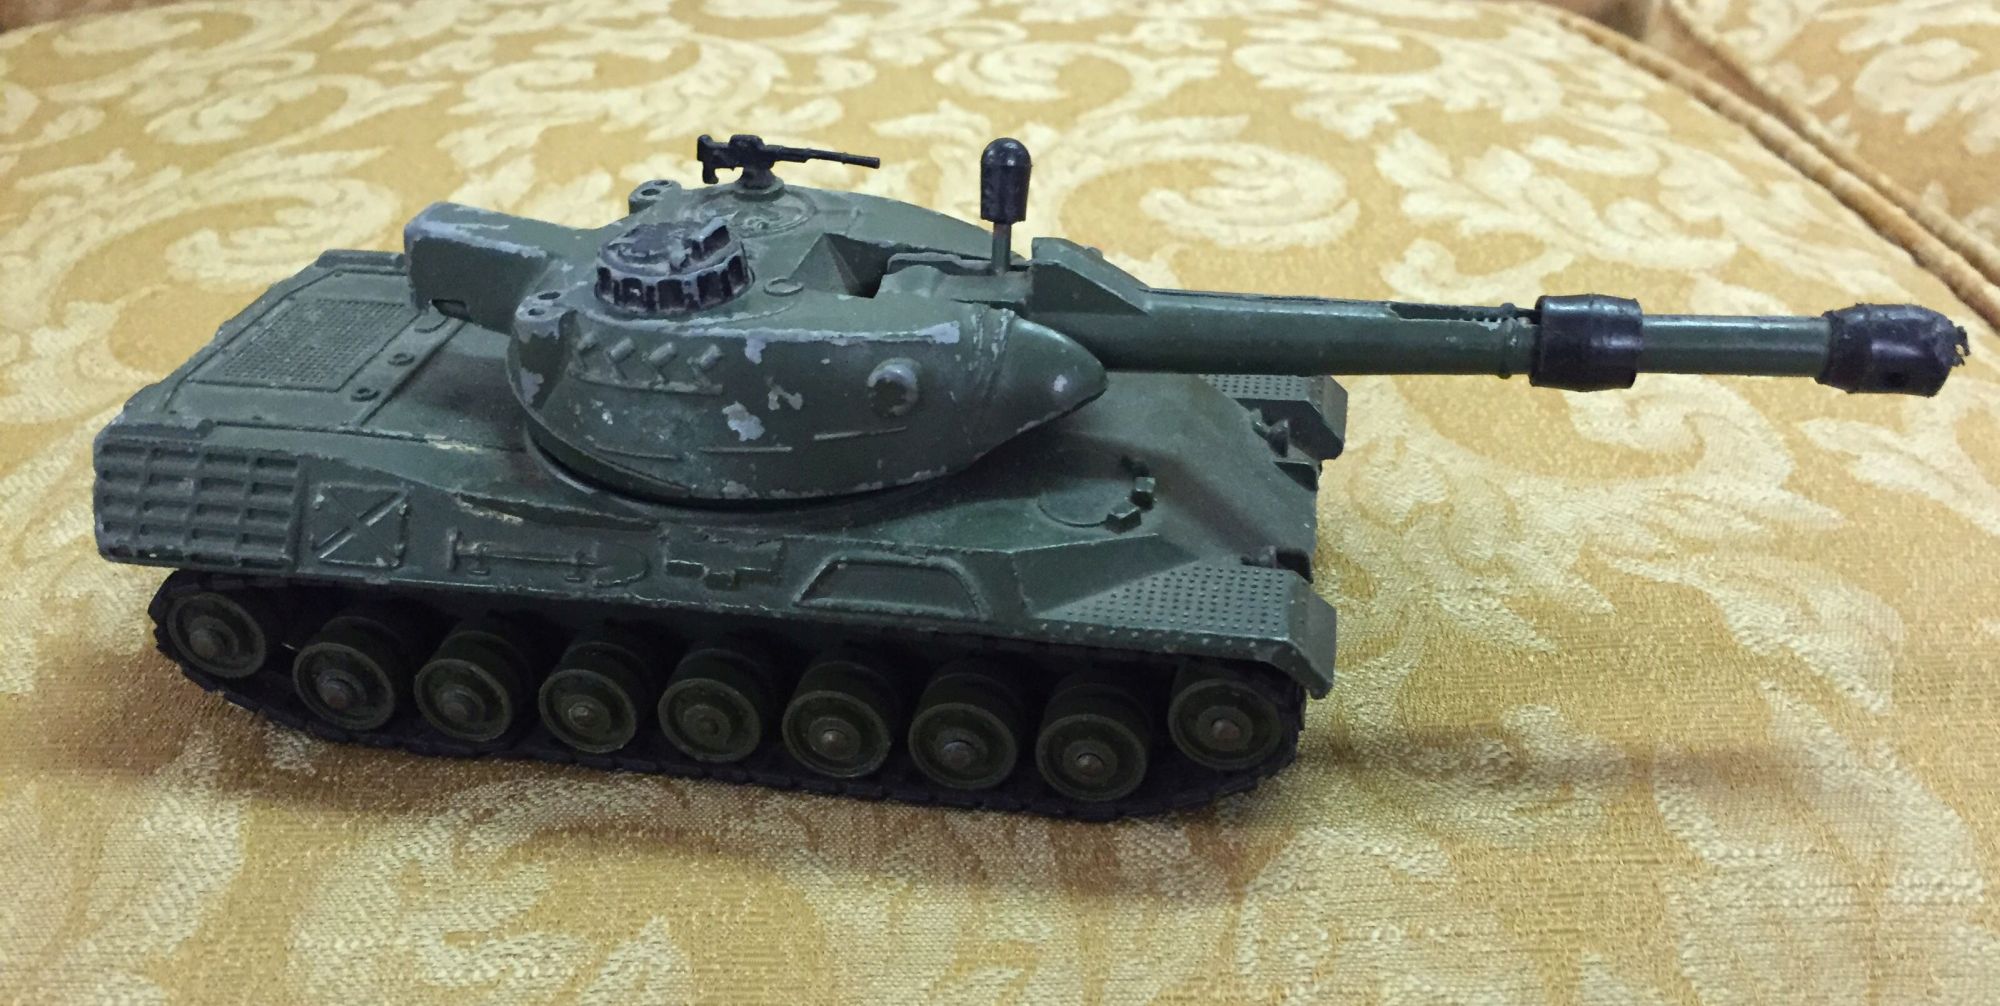 A Dinky leopard tank unboxed.